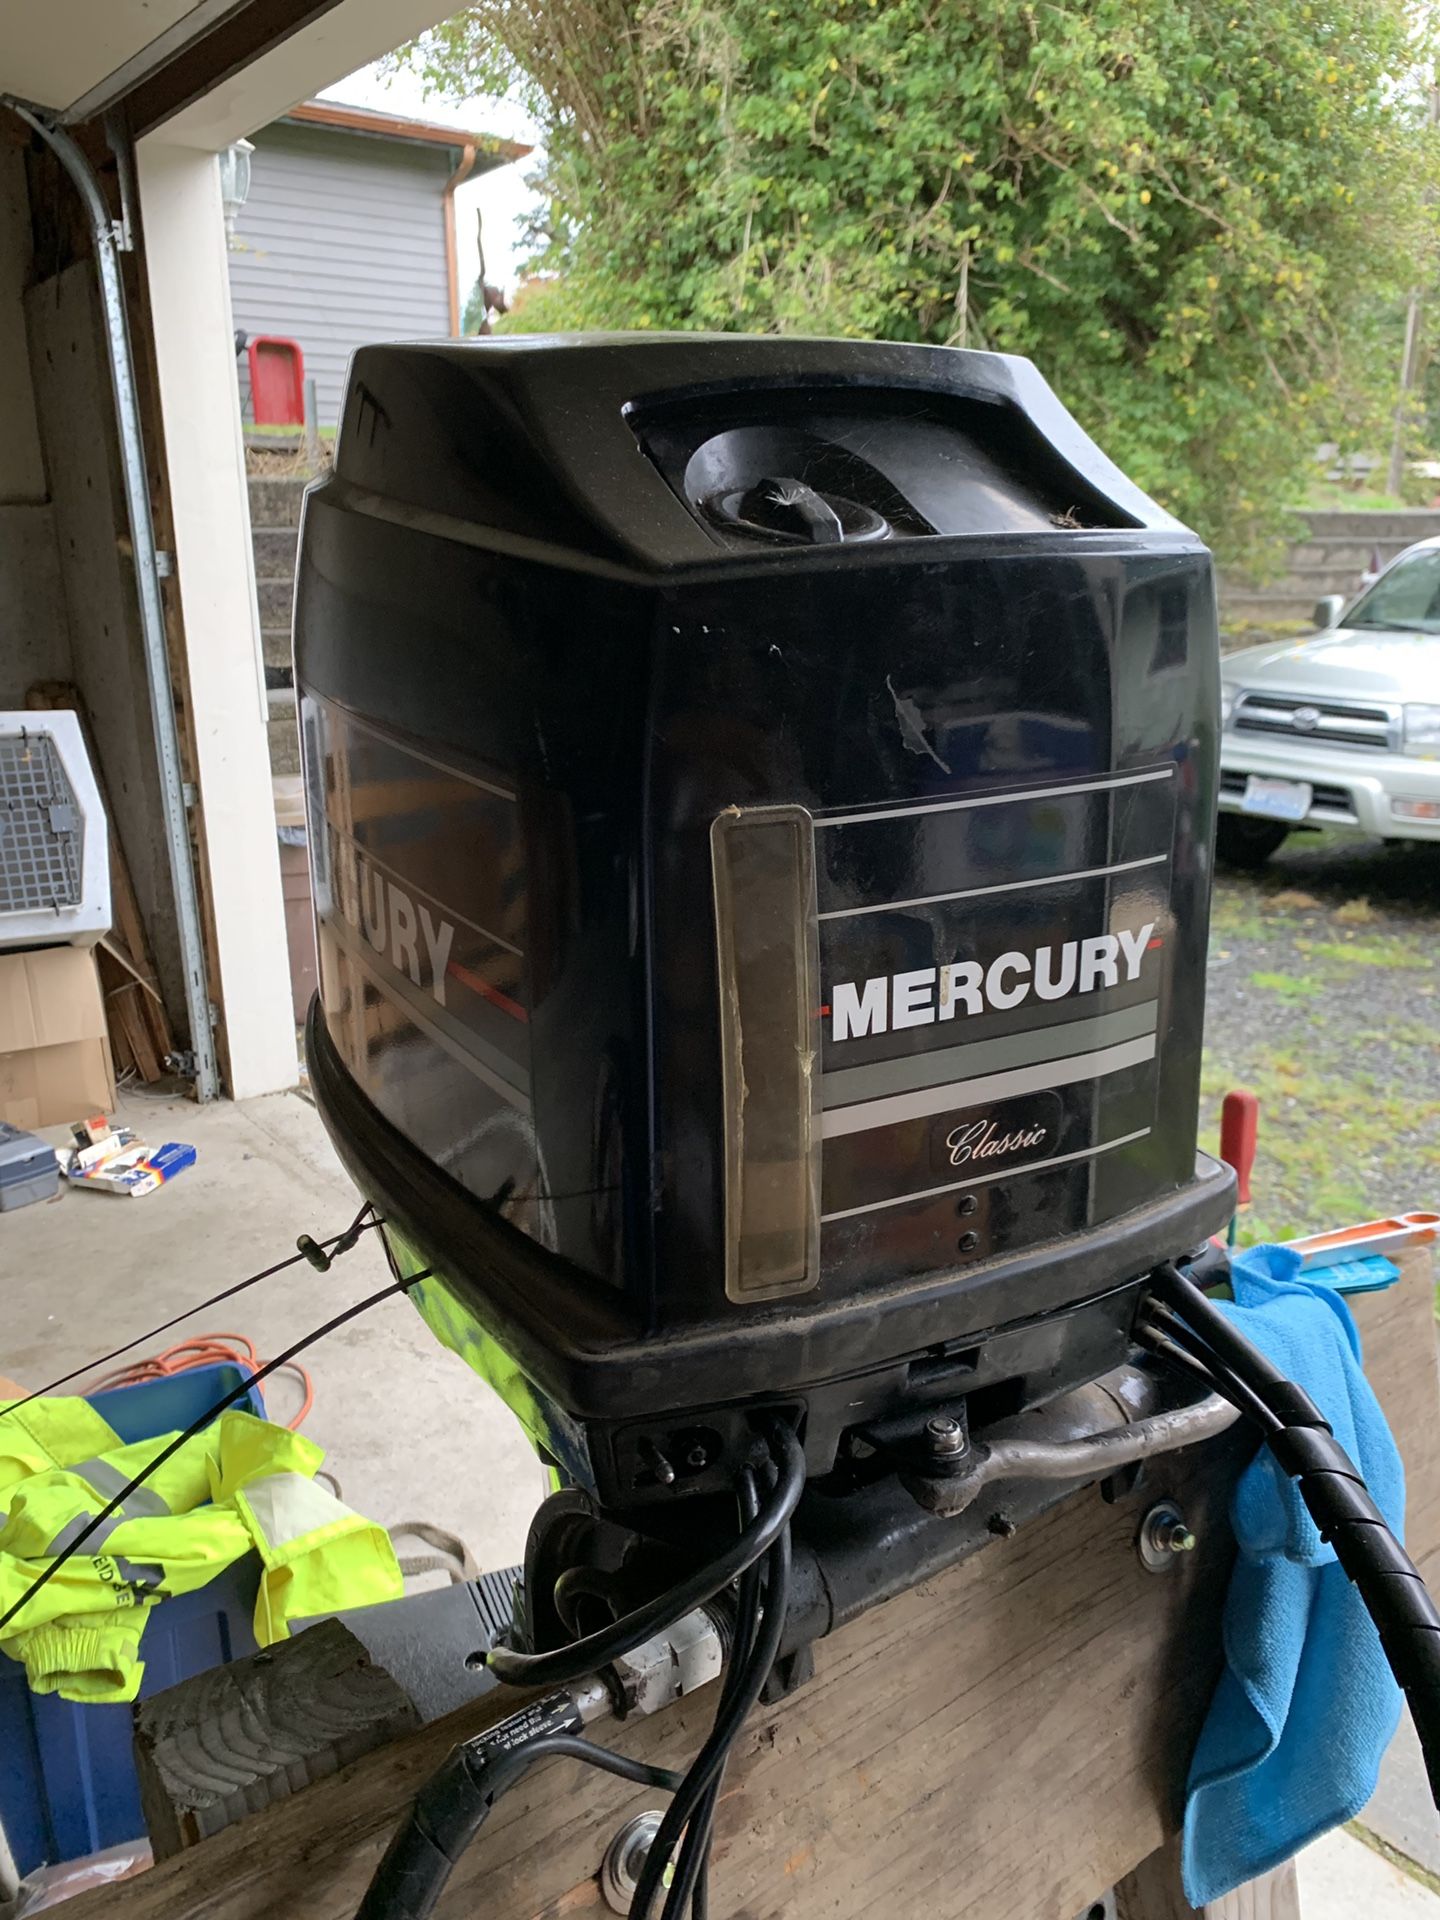 Mercury 40hp side console outboard